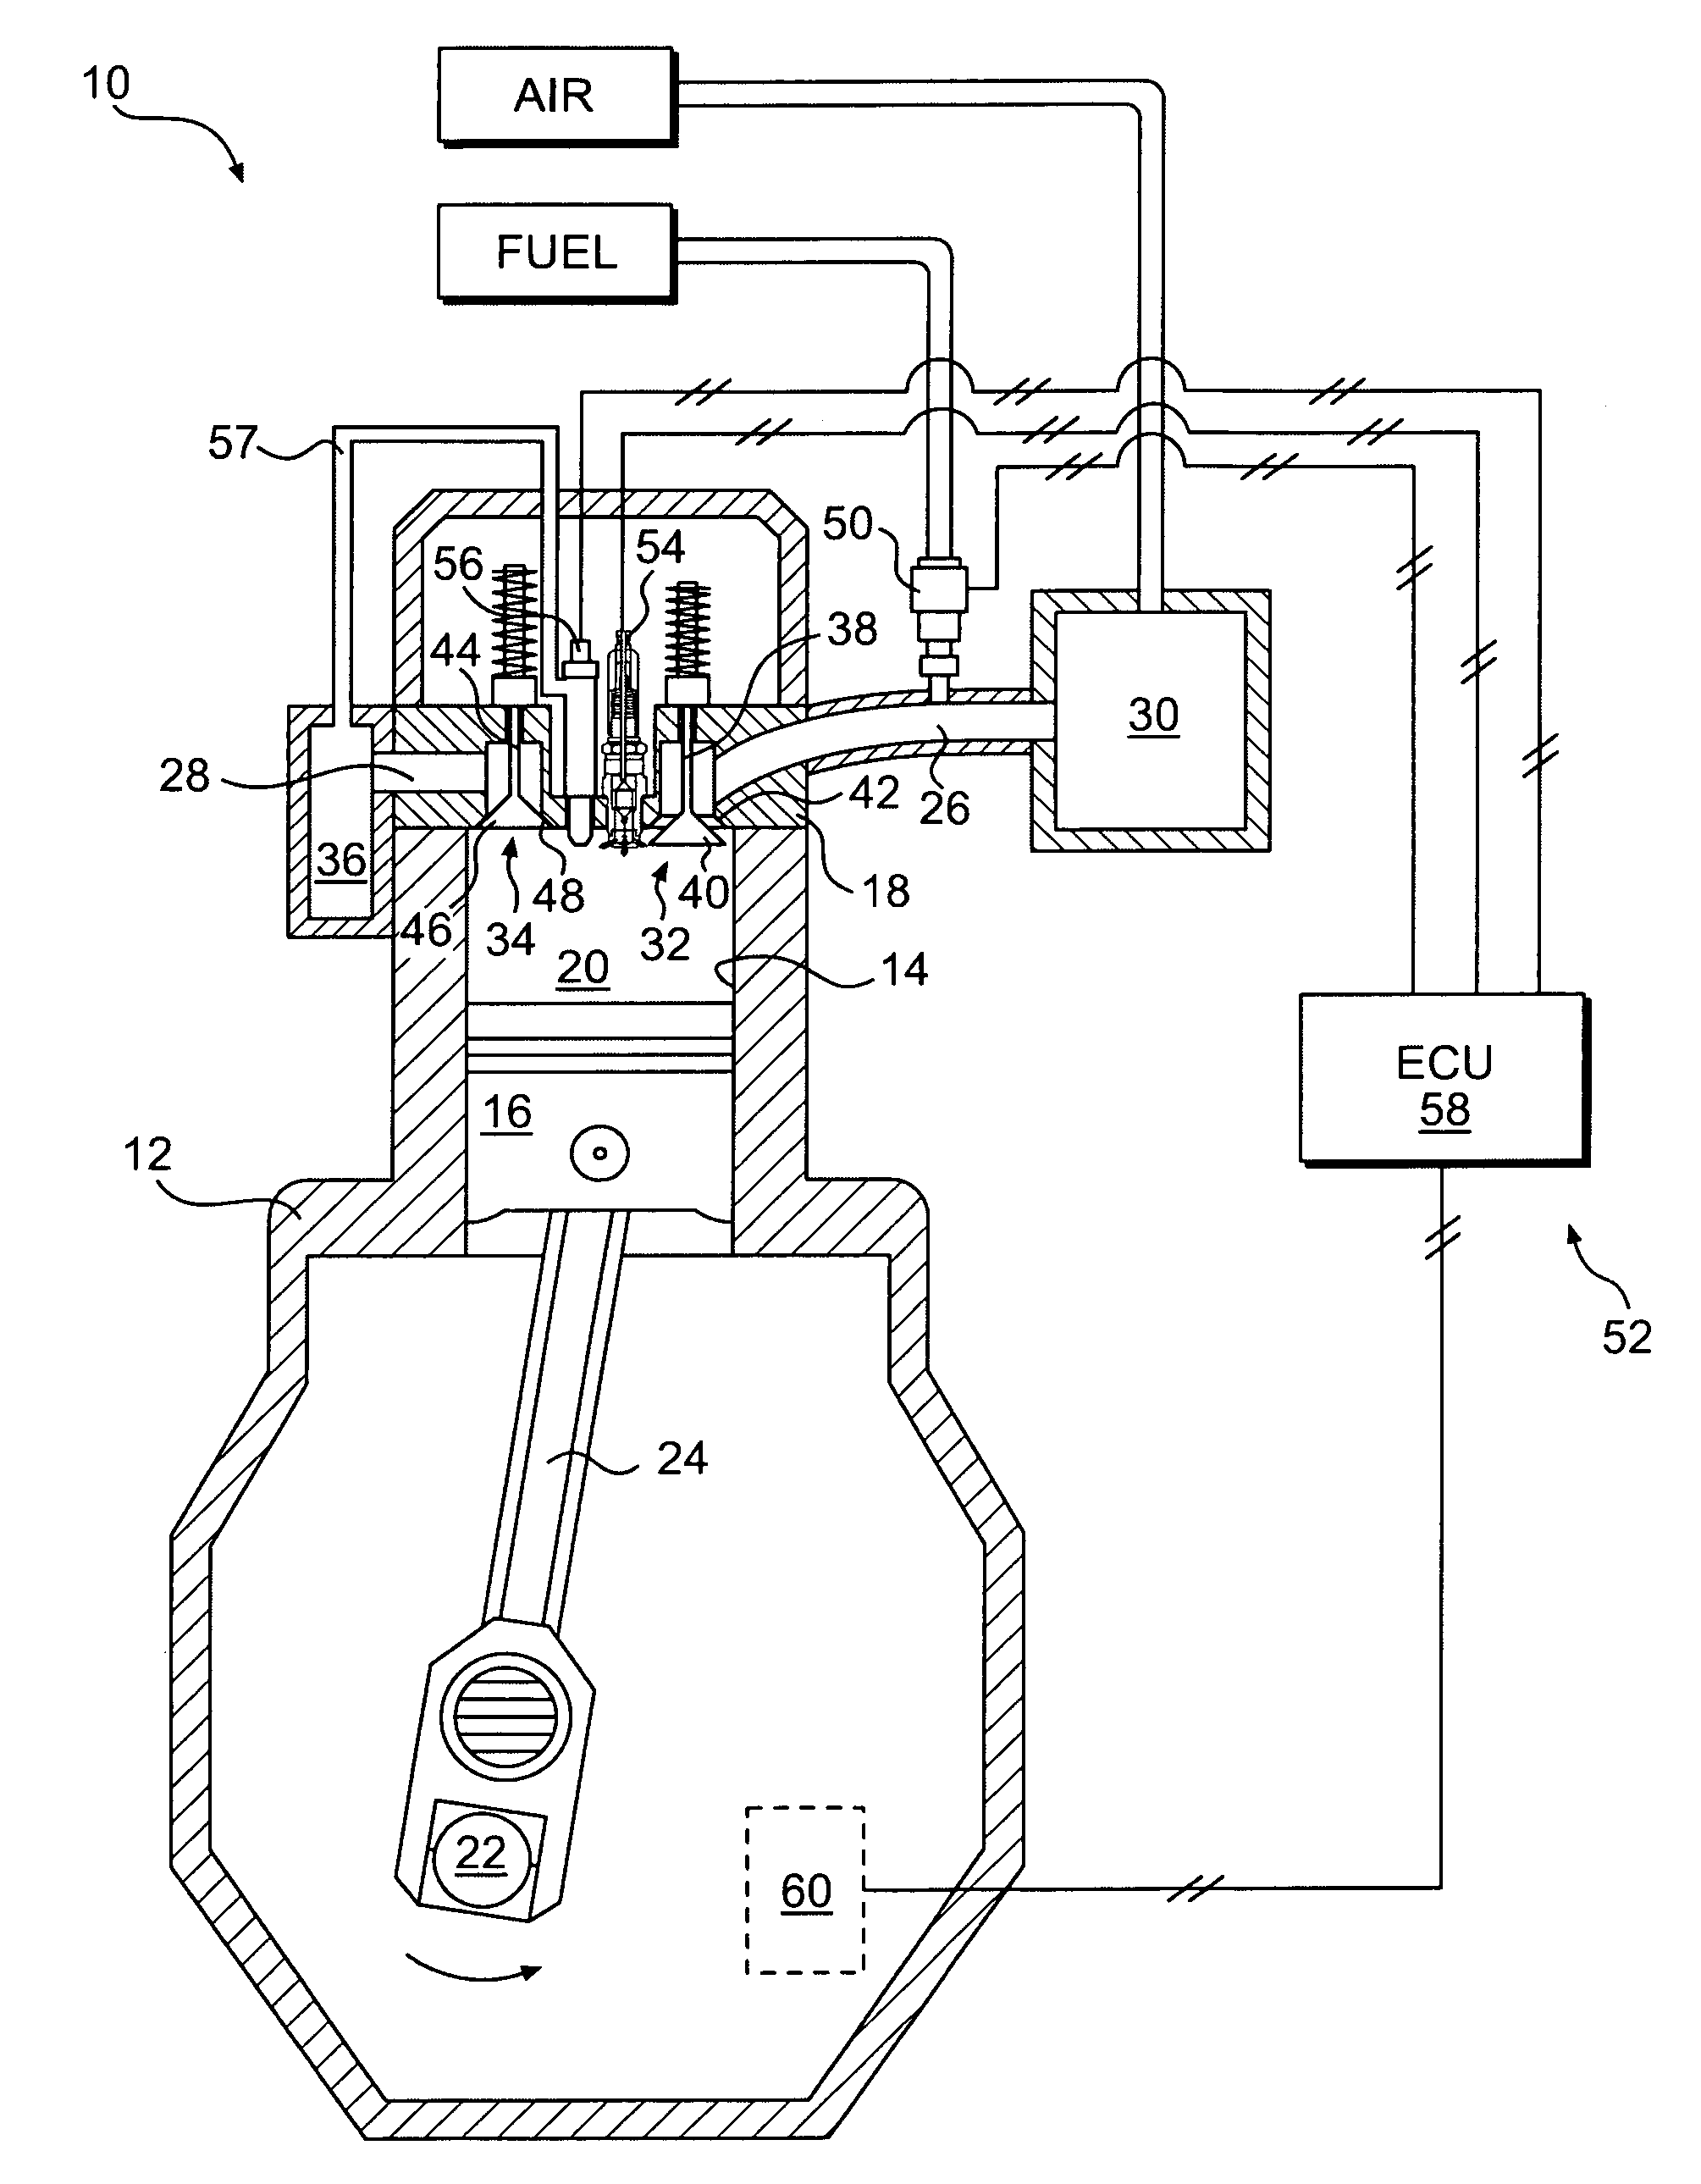 Ignition system utilizing igniter and gas injector